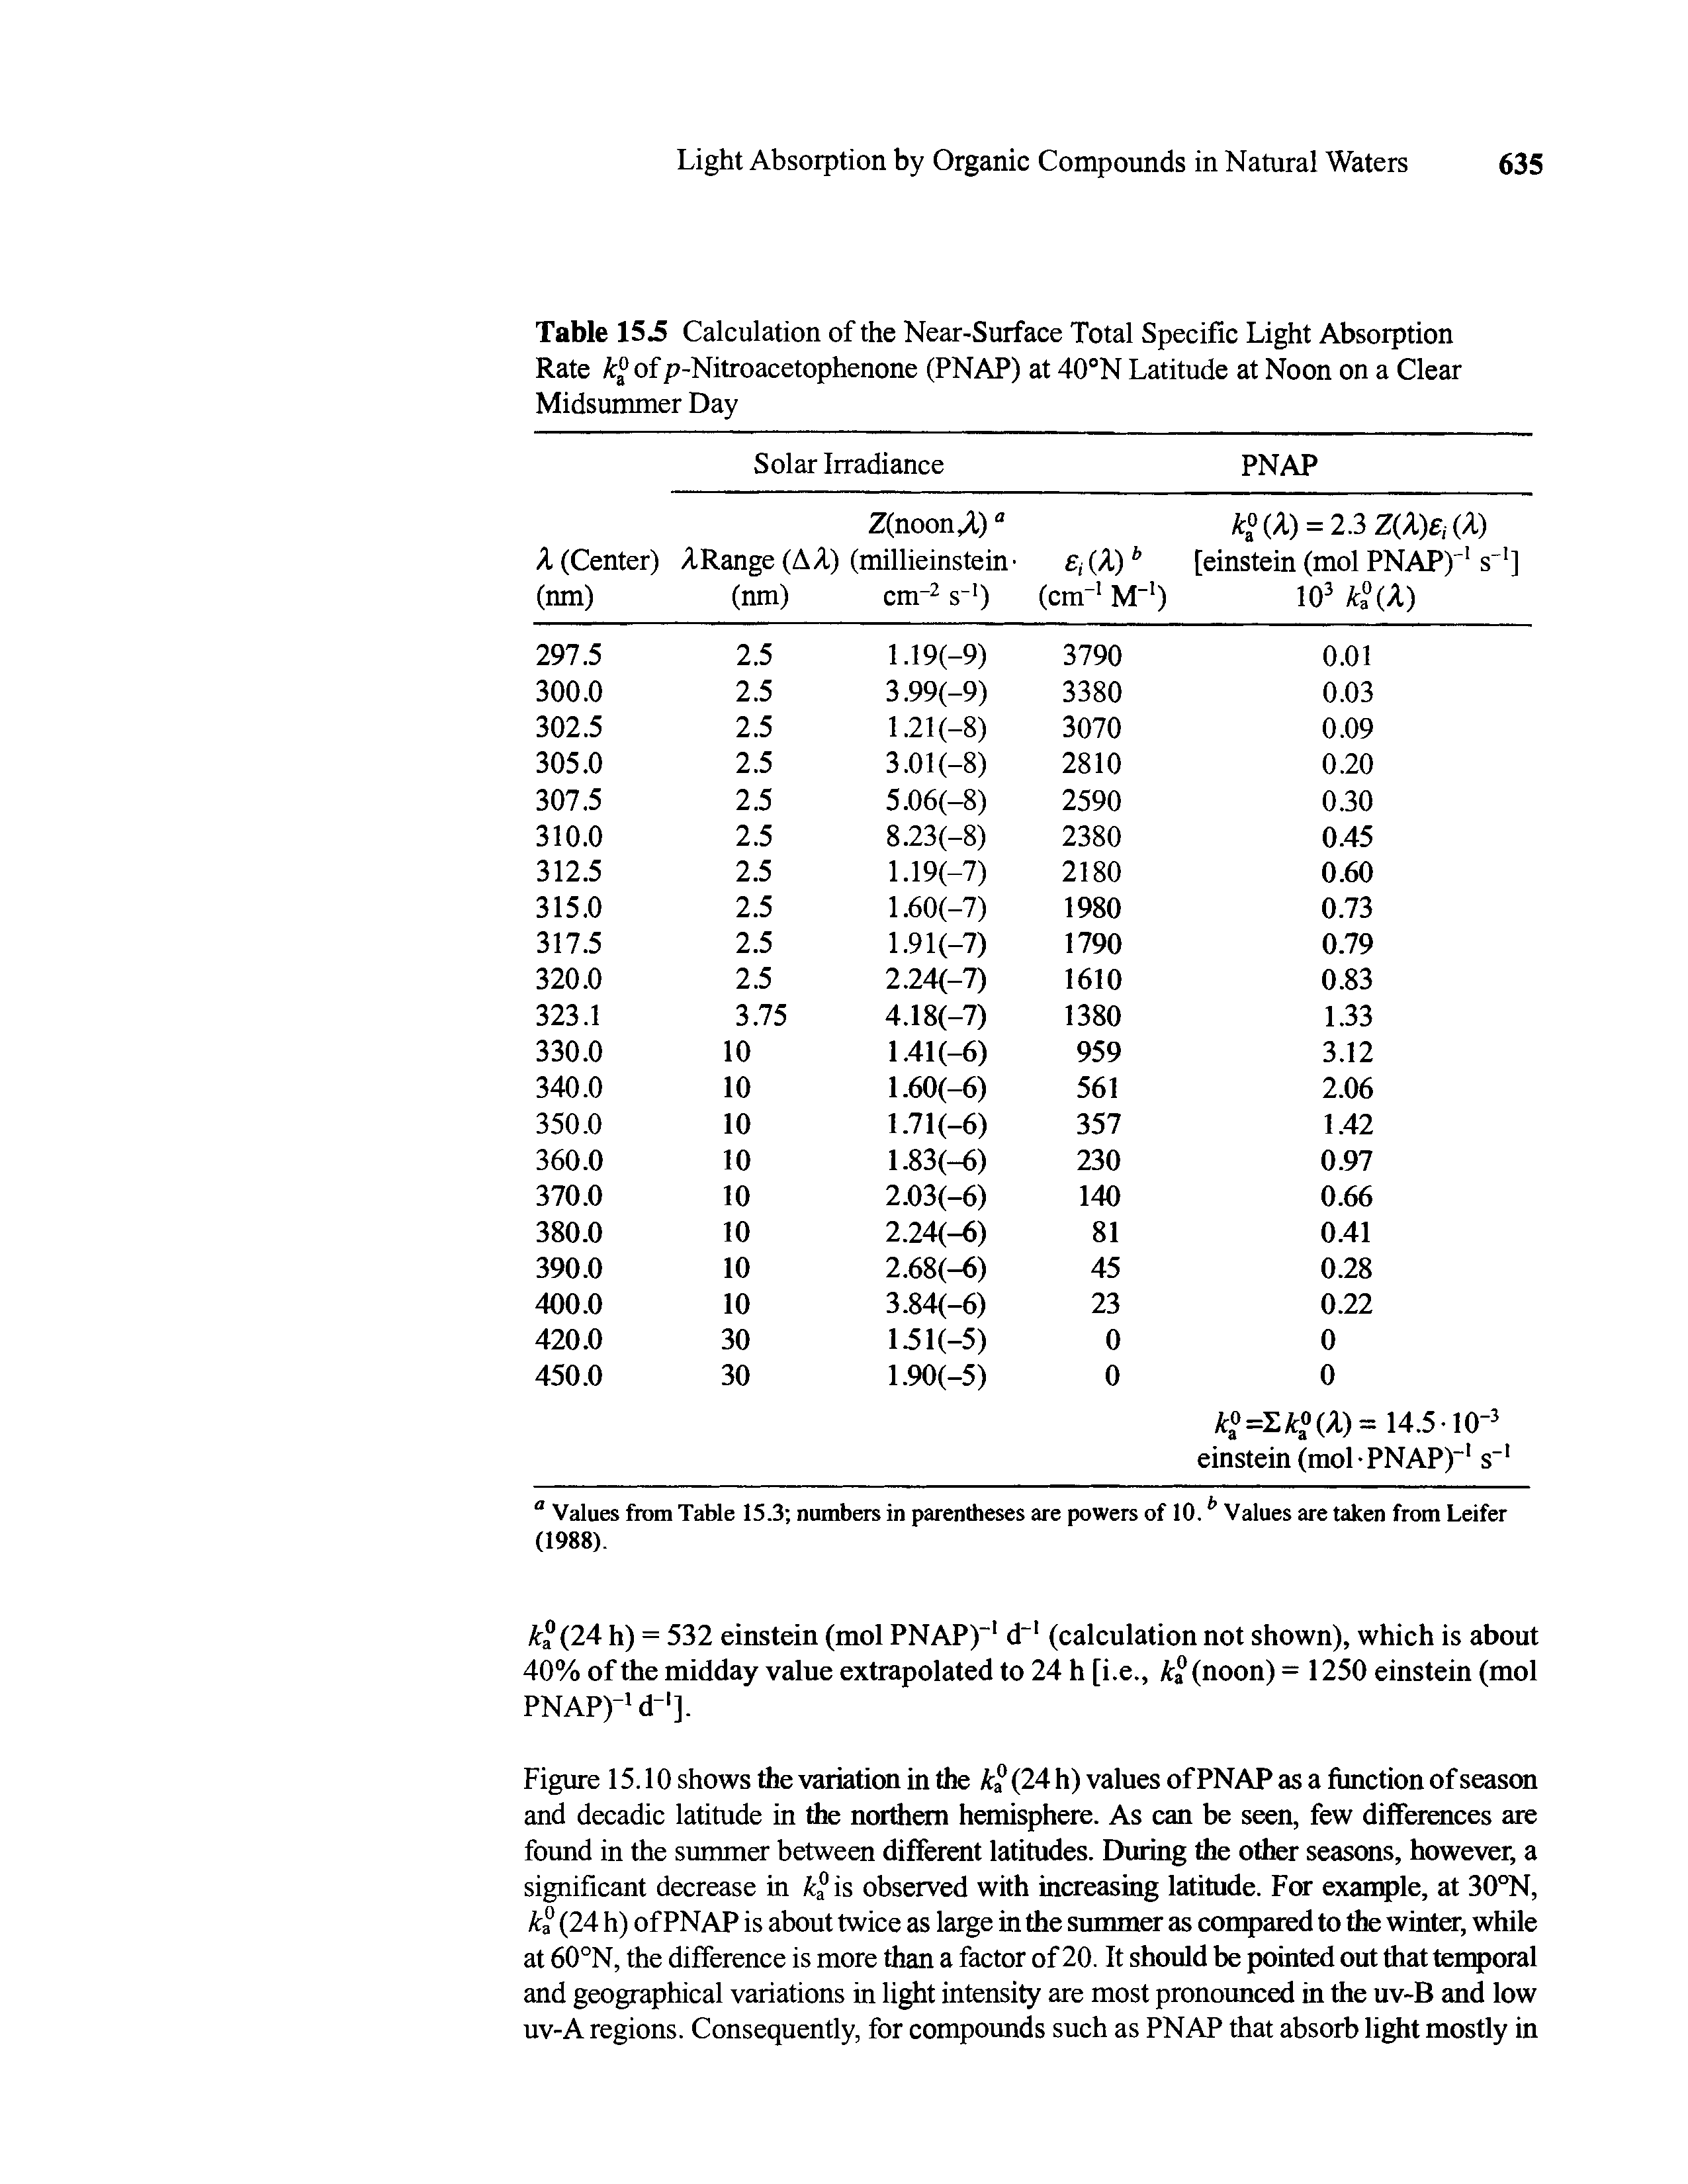 Table 15.5 Calculation of the Near-Surface Total Specific Light Absorption Rate A of p-Nitroacetophenone (PNAP) at 40°N Latitude at Noon on a Clear Midsummer Day...